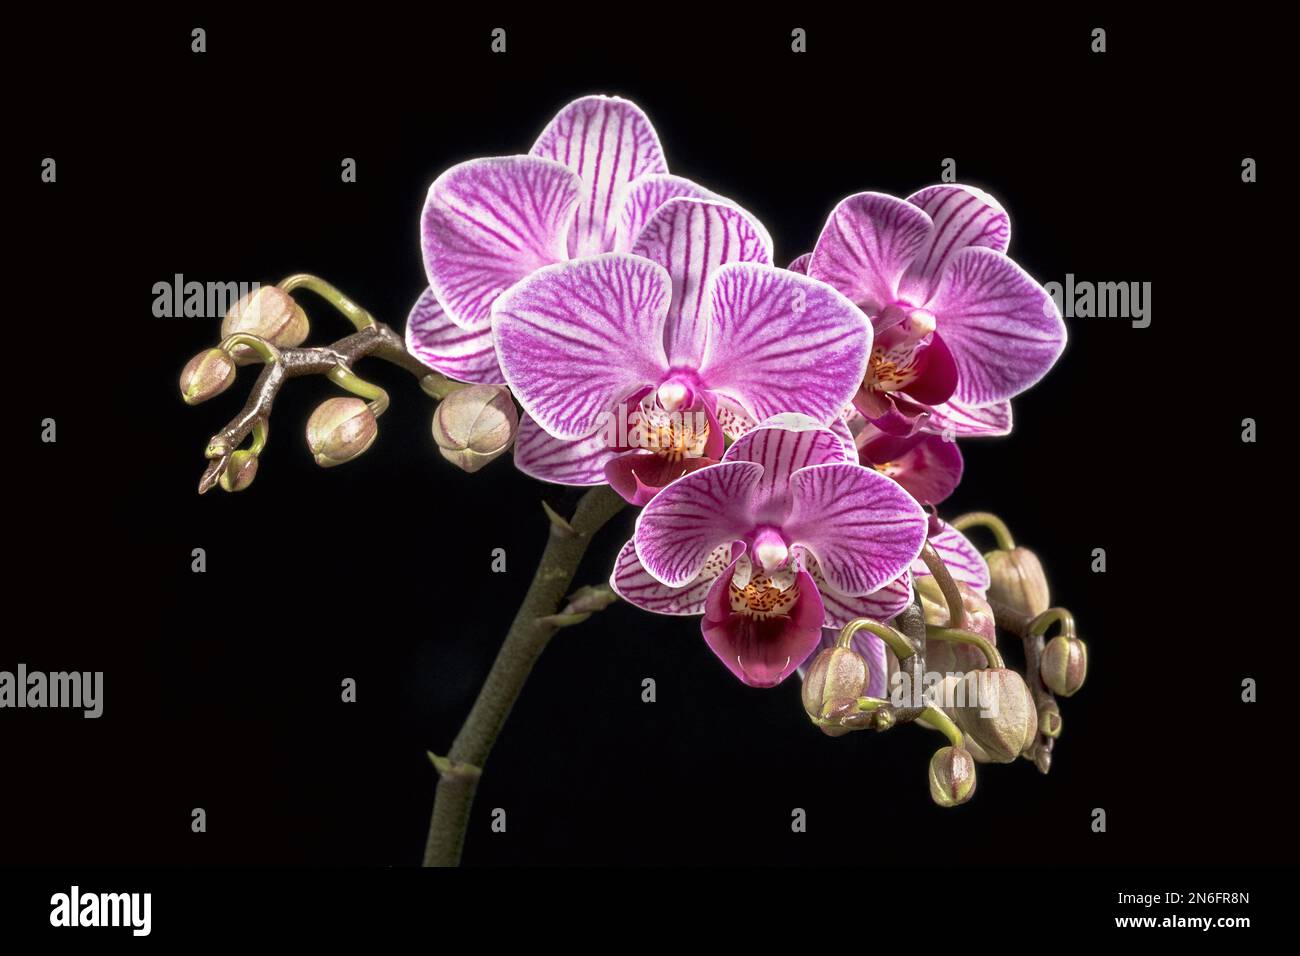 cluster of purple and white striped phalaenopsis moth orchid flowers on a black background showing a number of buds Stock Photo